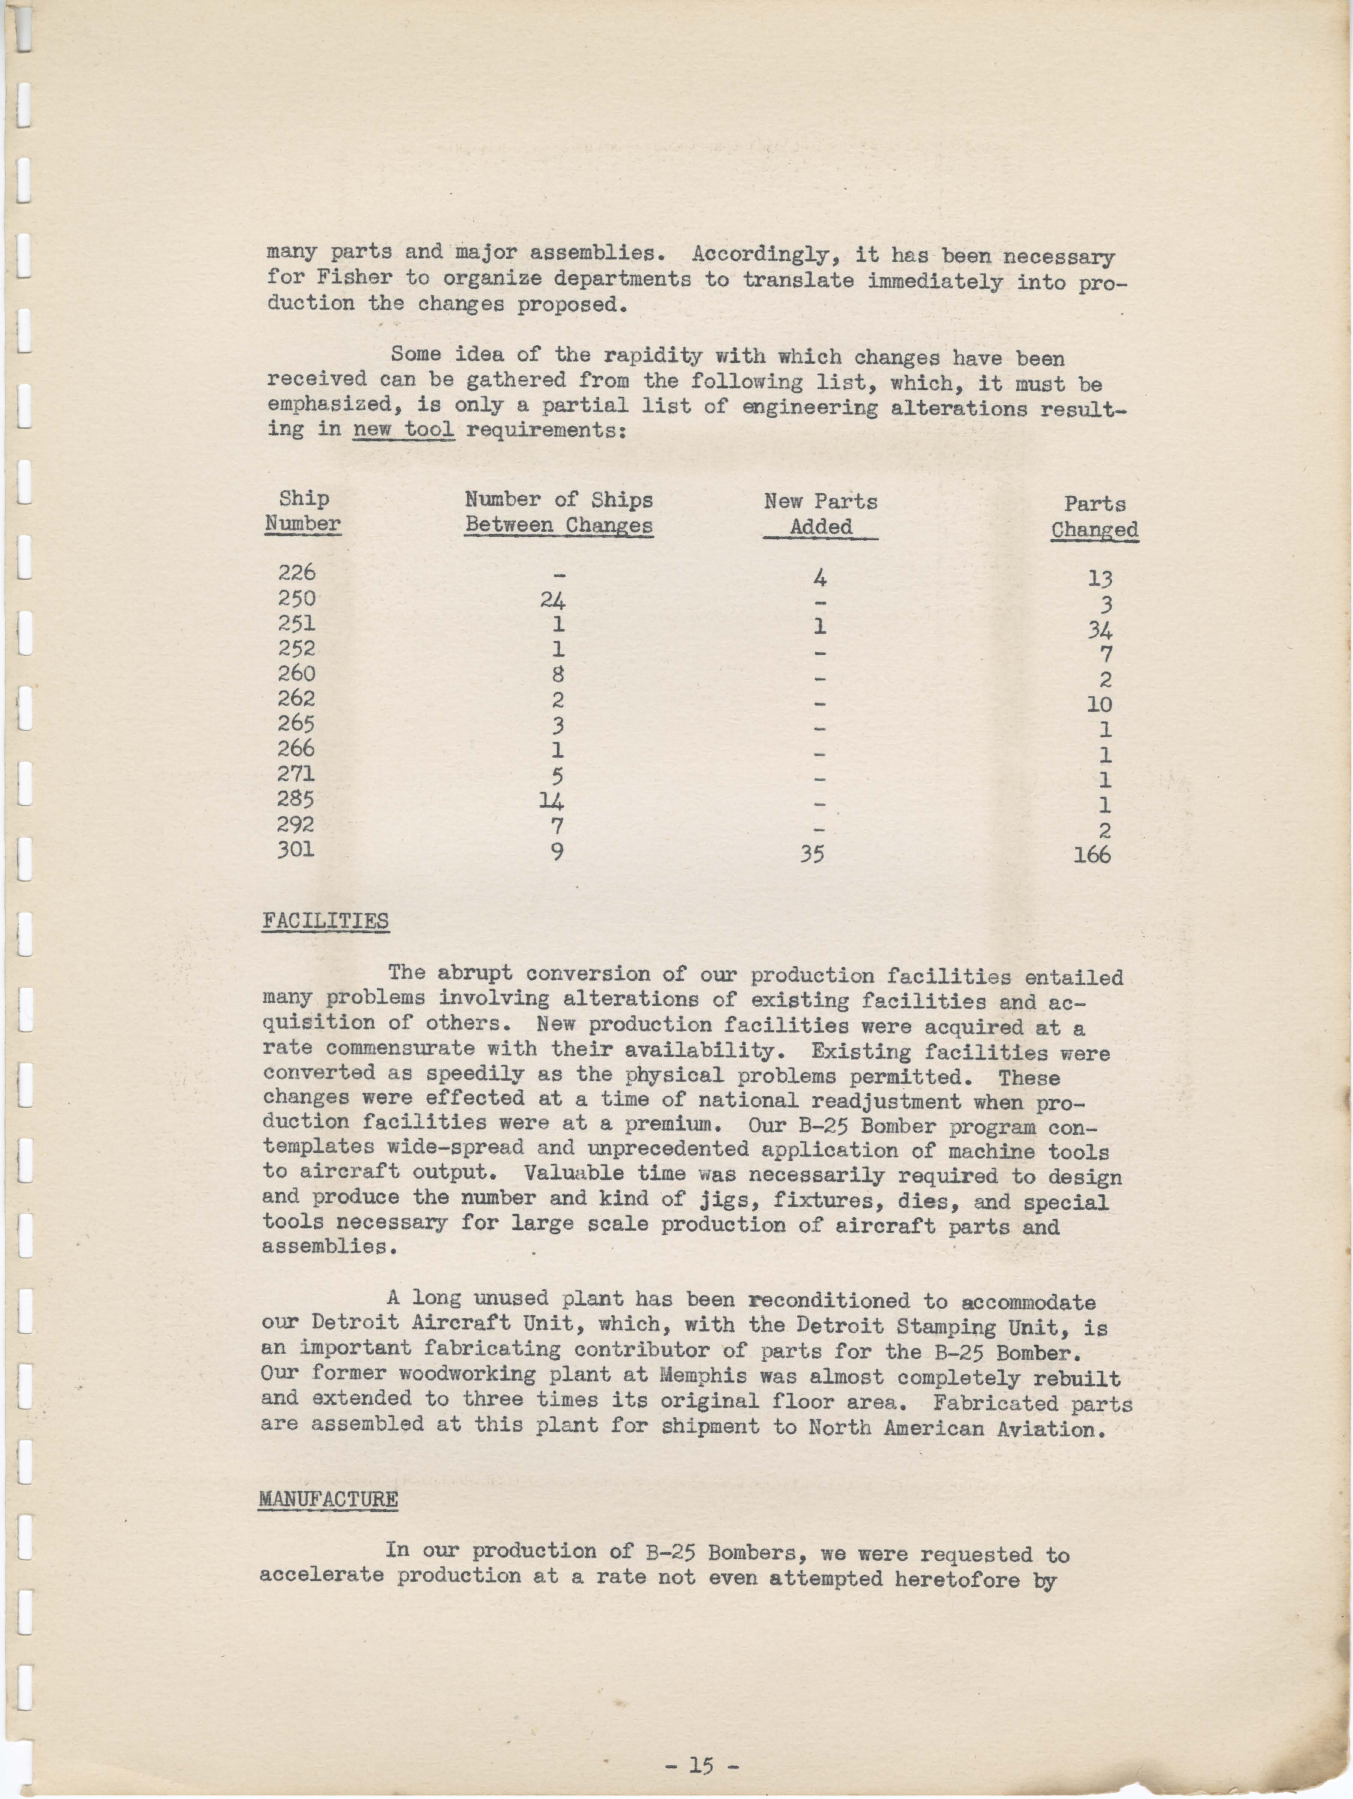 Sample page 6 from AirCorps Library document: Fisher Auto Body Operating Report - Aircraft Program